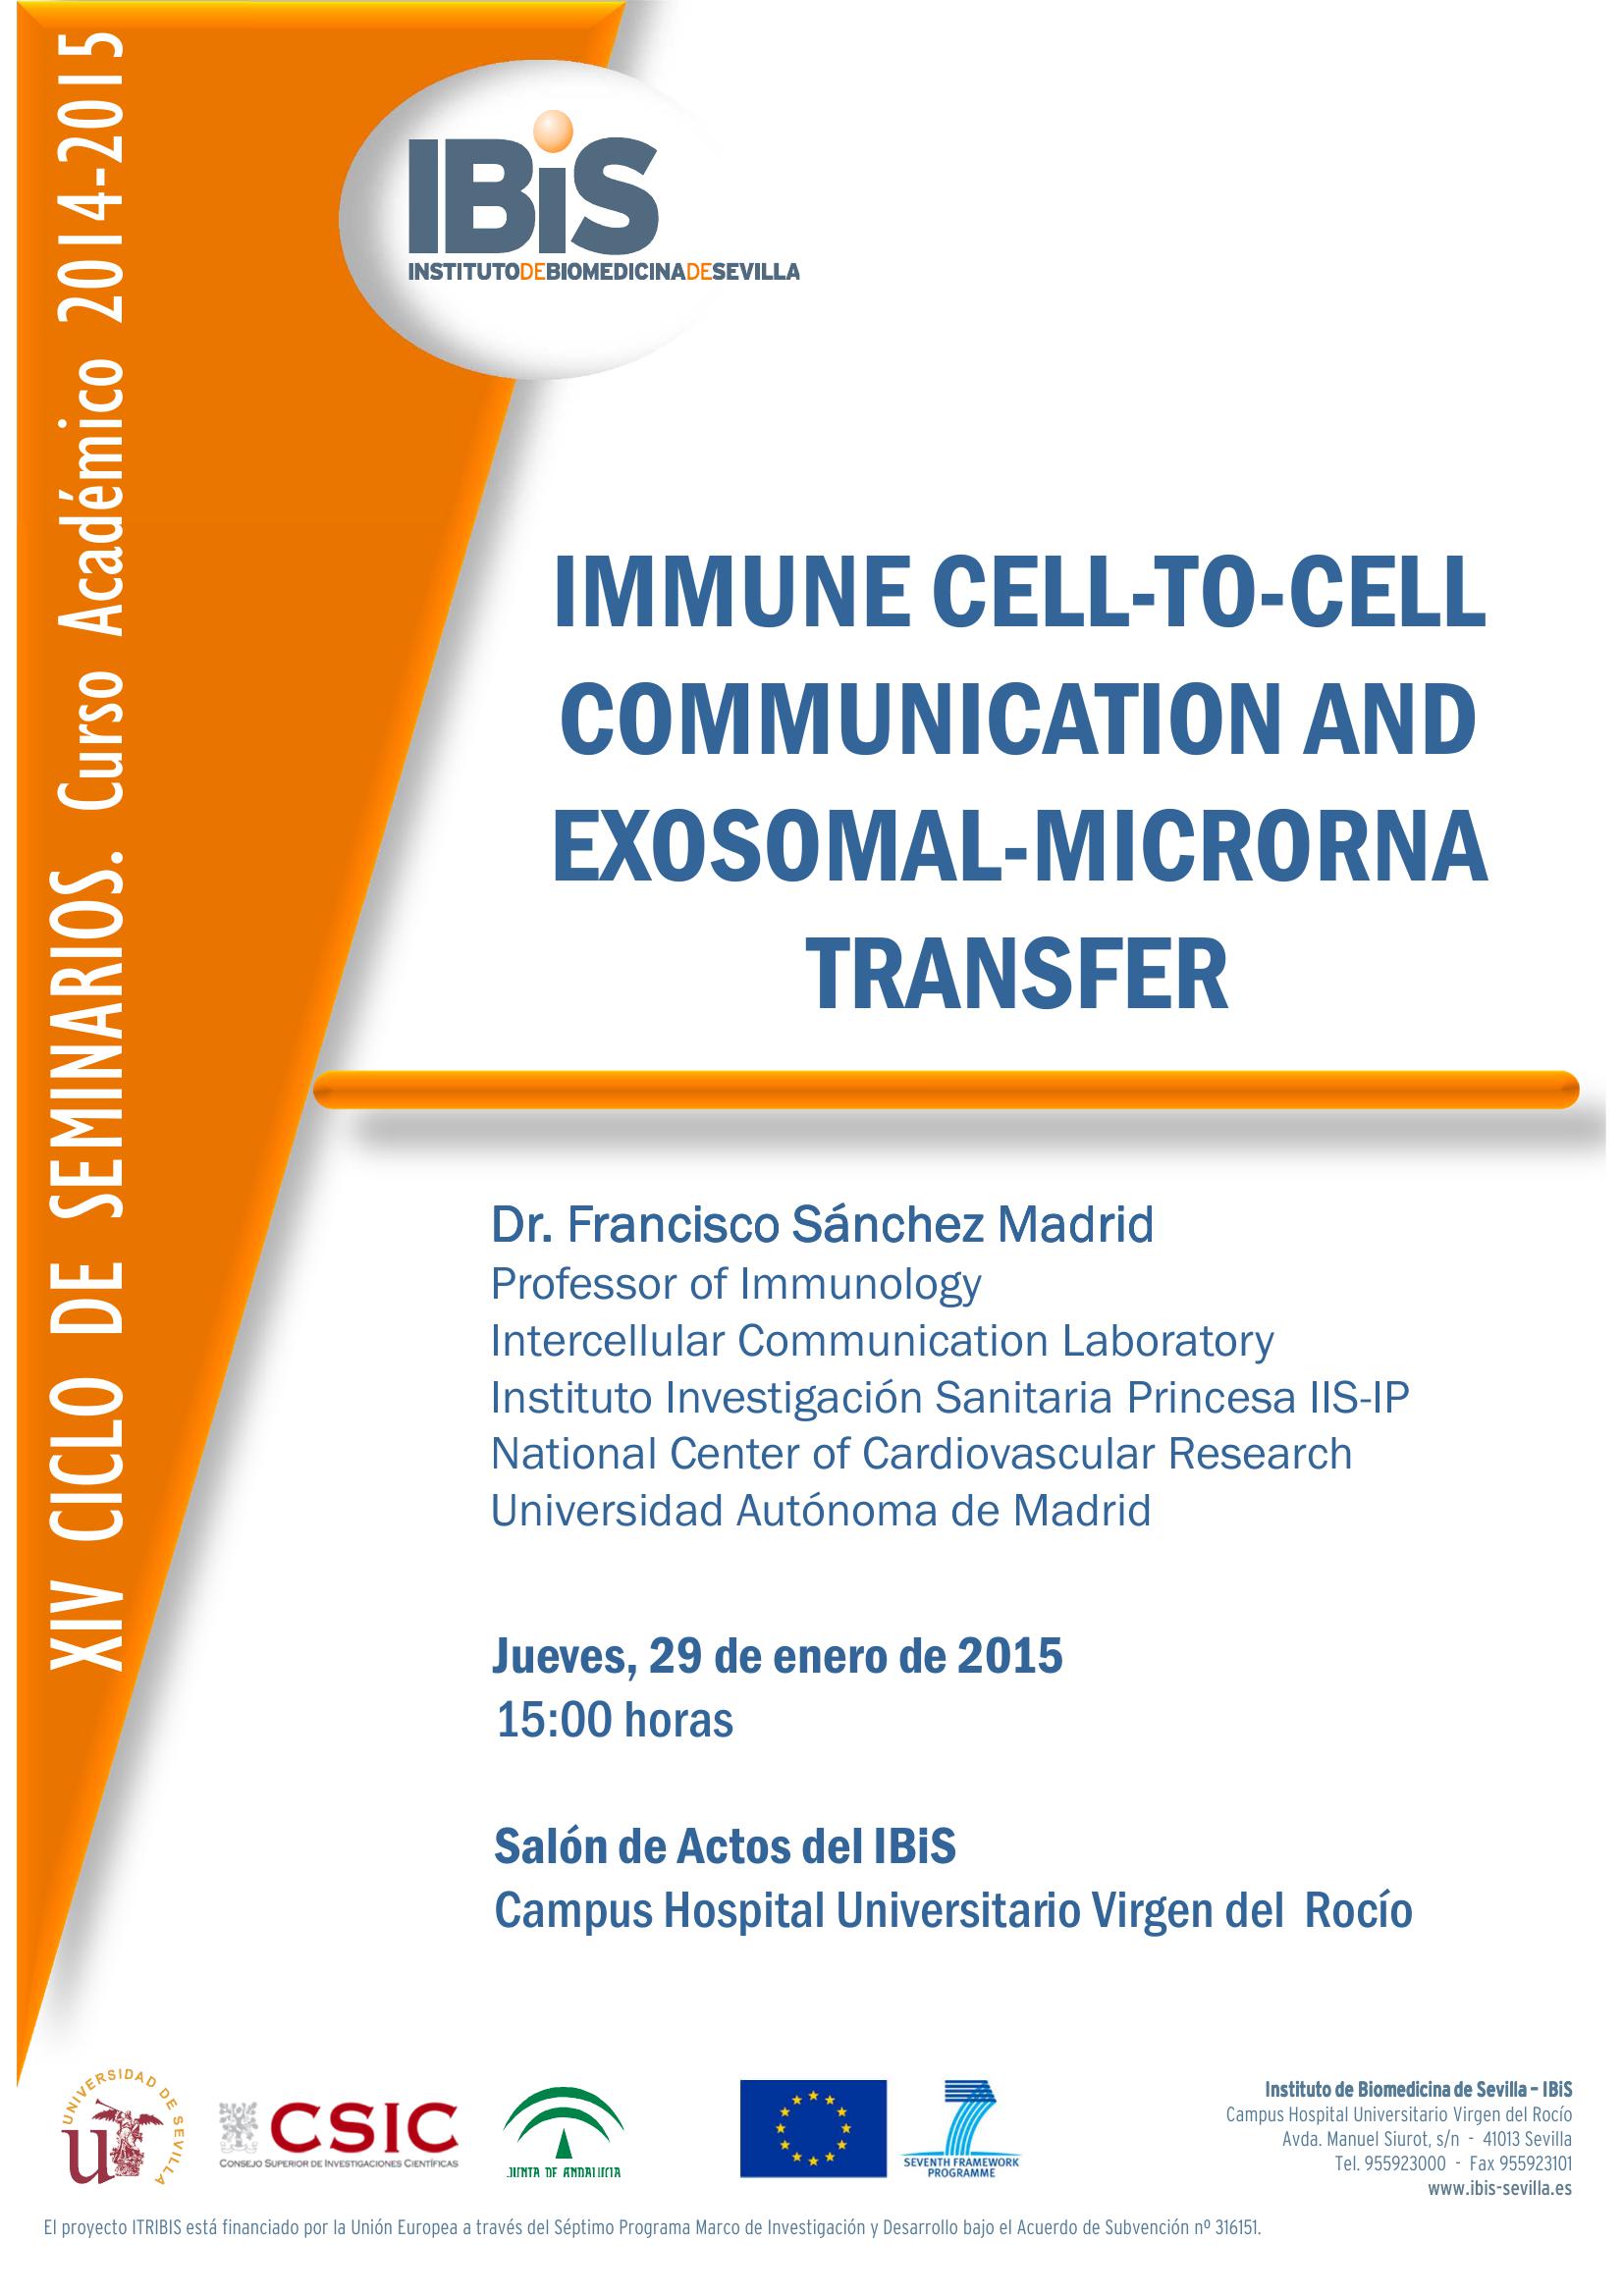 Poster: IMMUNE CELL-TO-CELL COMMUNICATION AND EXOSOMAL-MICRORNA TRANSFER